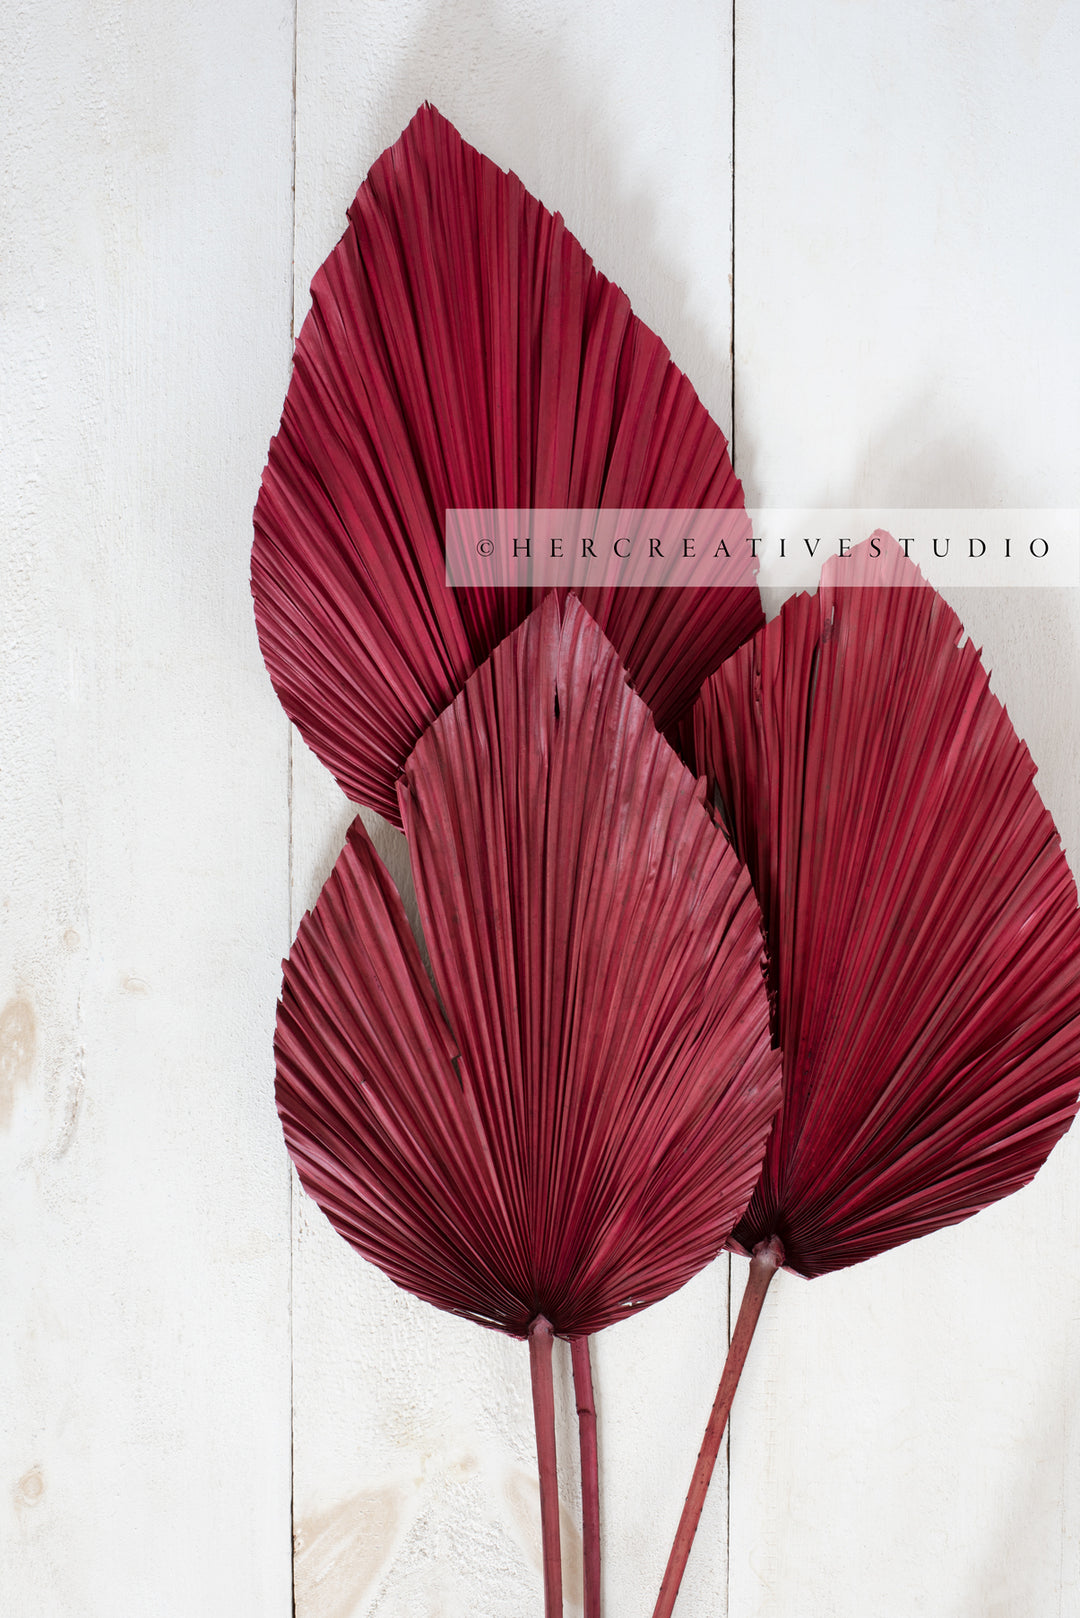 Dried Palm, Red on White Background